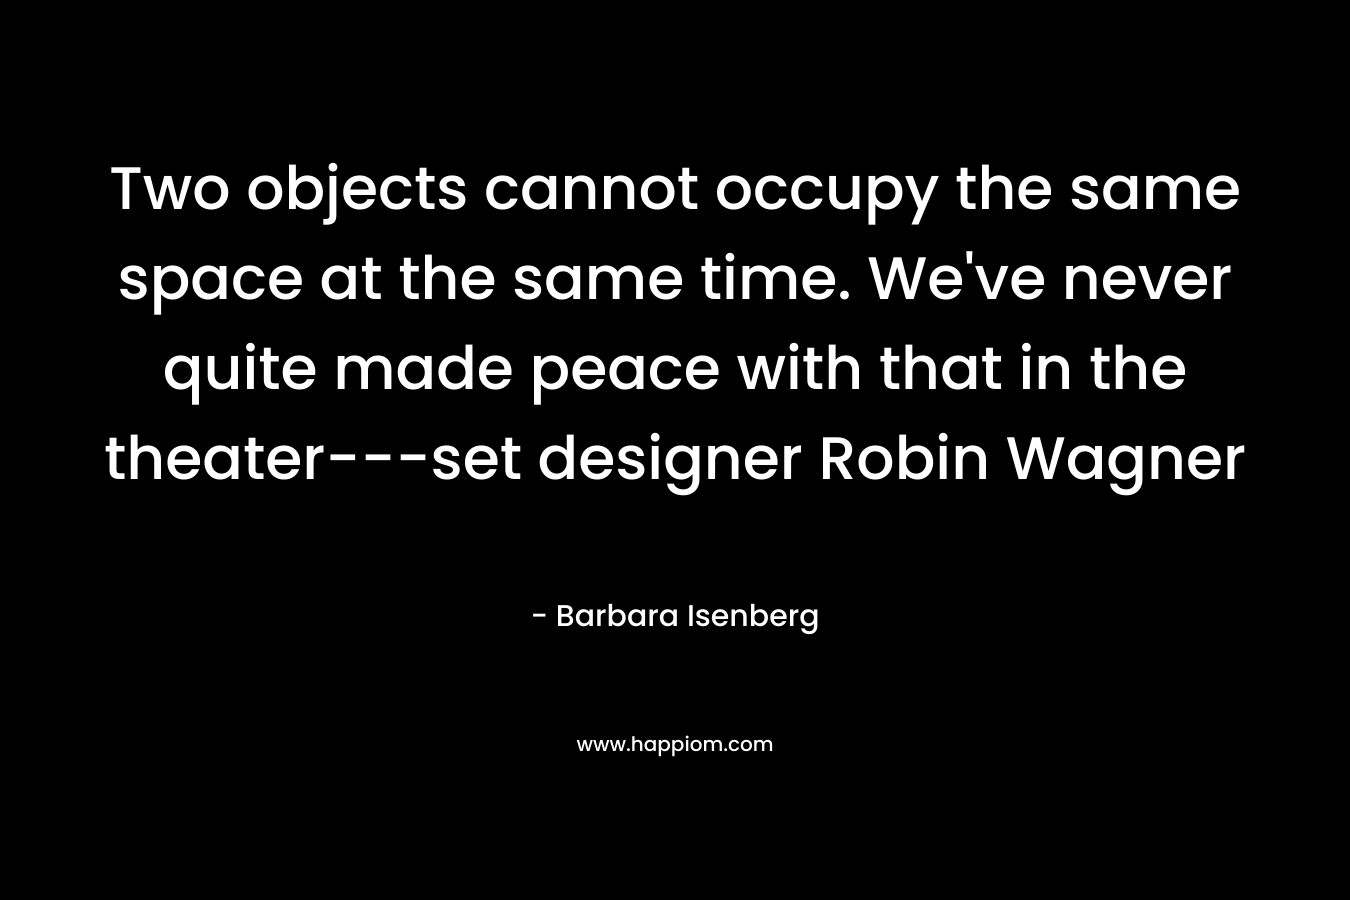 Two objects cannot occupy the same space at the same time. We've never quite made peace with that in the theater---set designer Robin Wagner